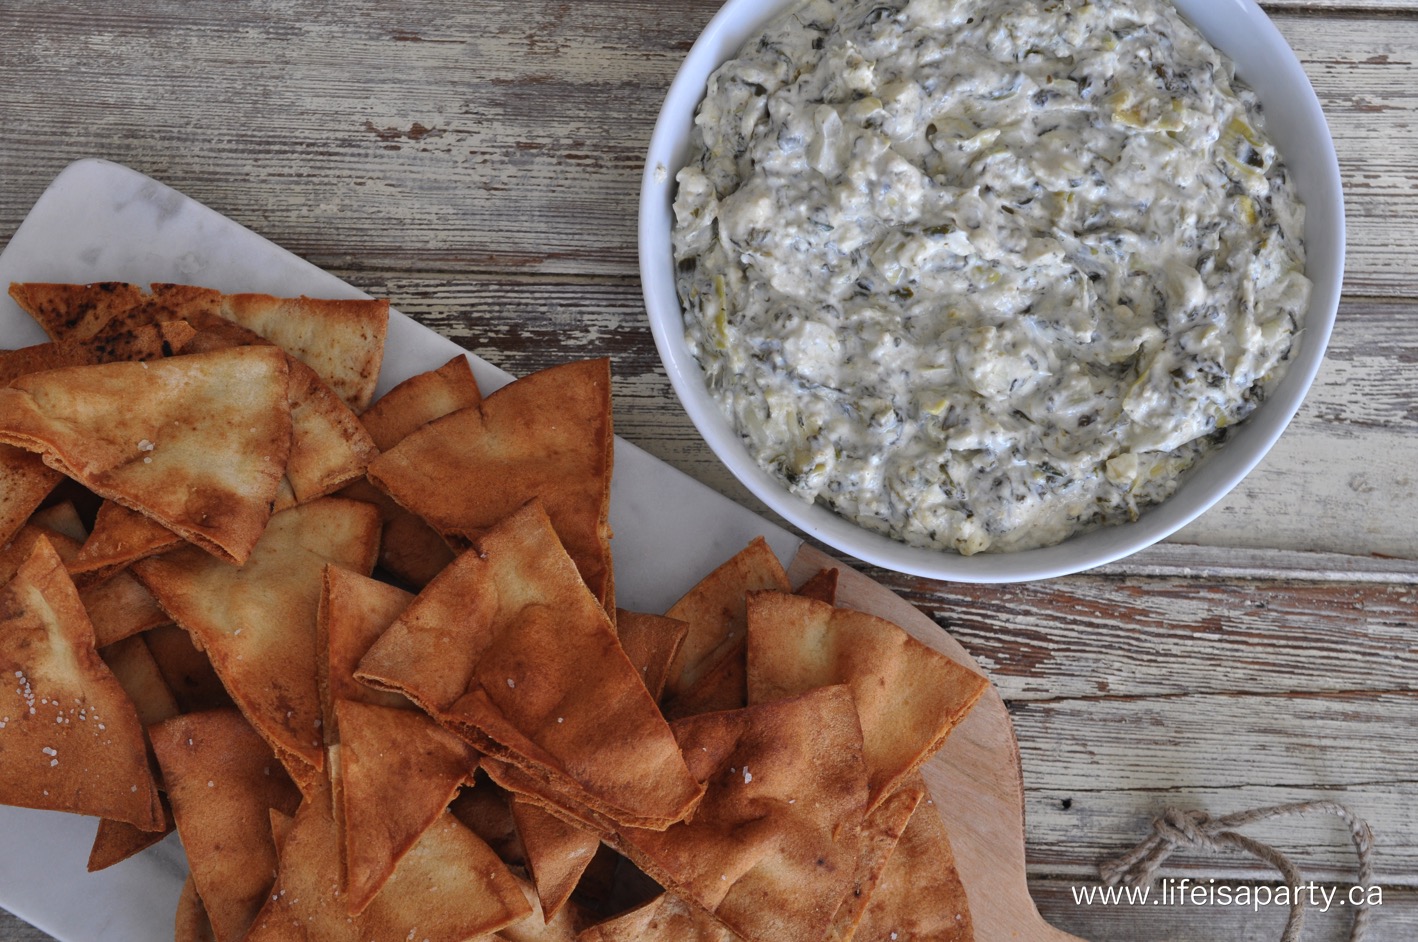 Slow Cooker Spinach and Artichoke Dip and pita chips